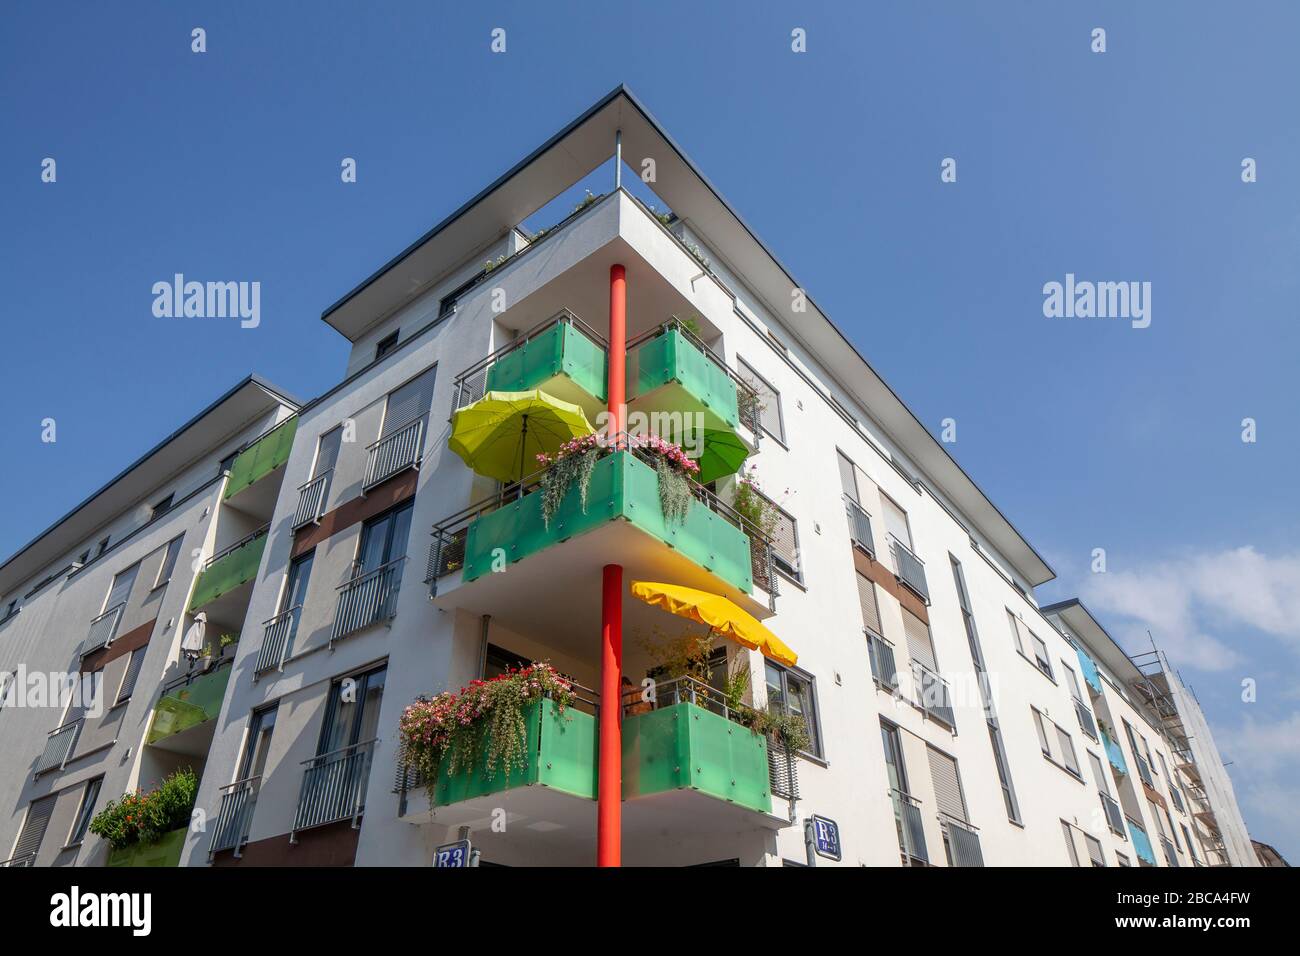 Modern residential building, colorful balconies with parasols, Mannheim, Baden-Württemberg, Germany, Europe Stock Photo